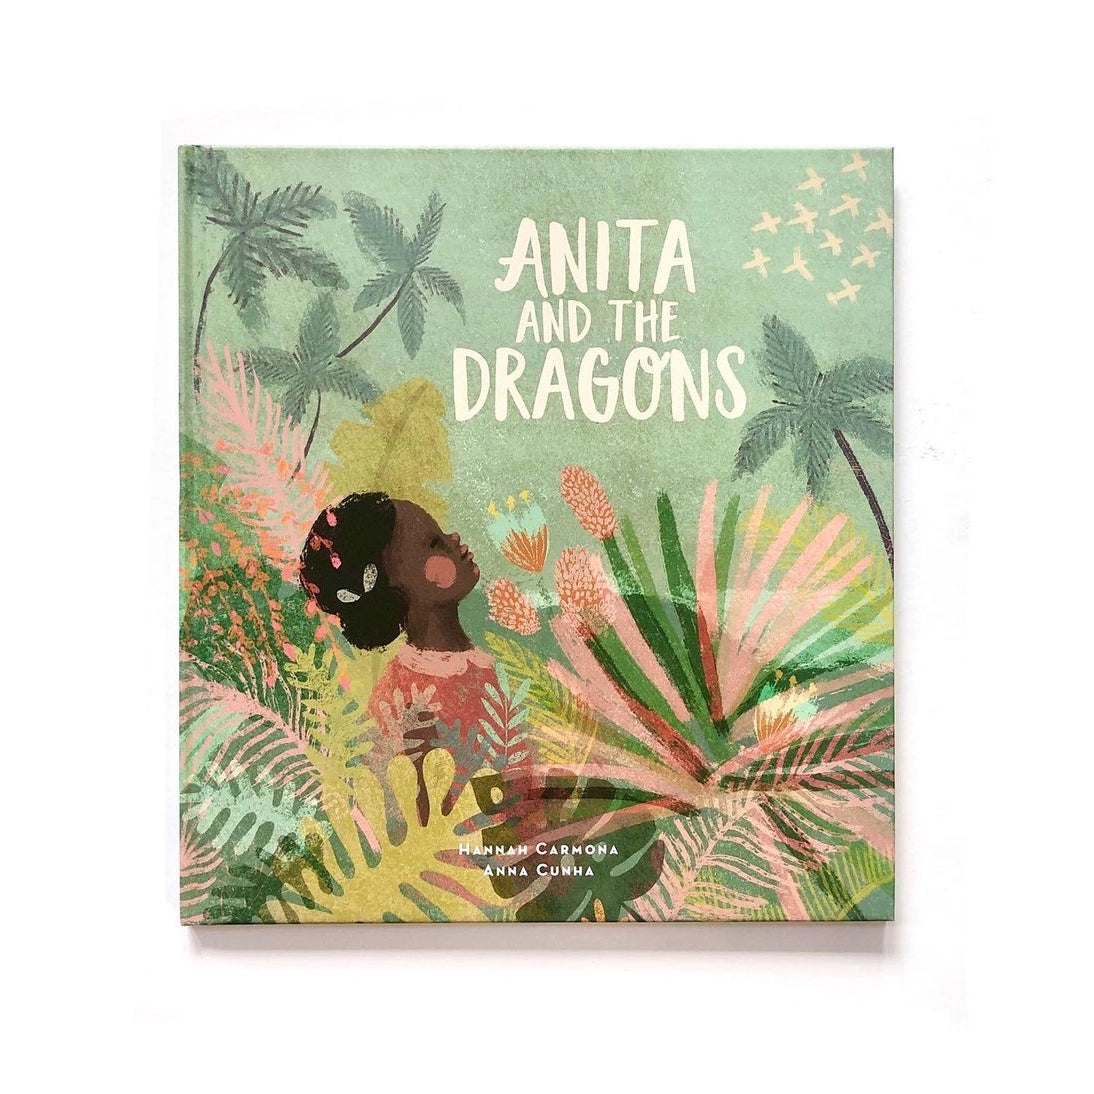 Anita and the Dragons: Diverse & Inclusive